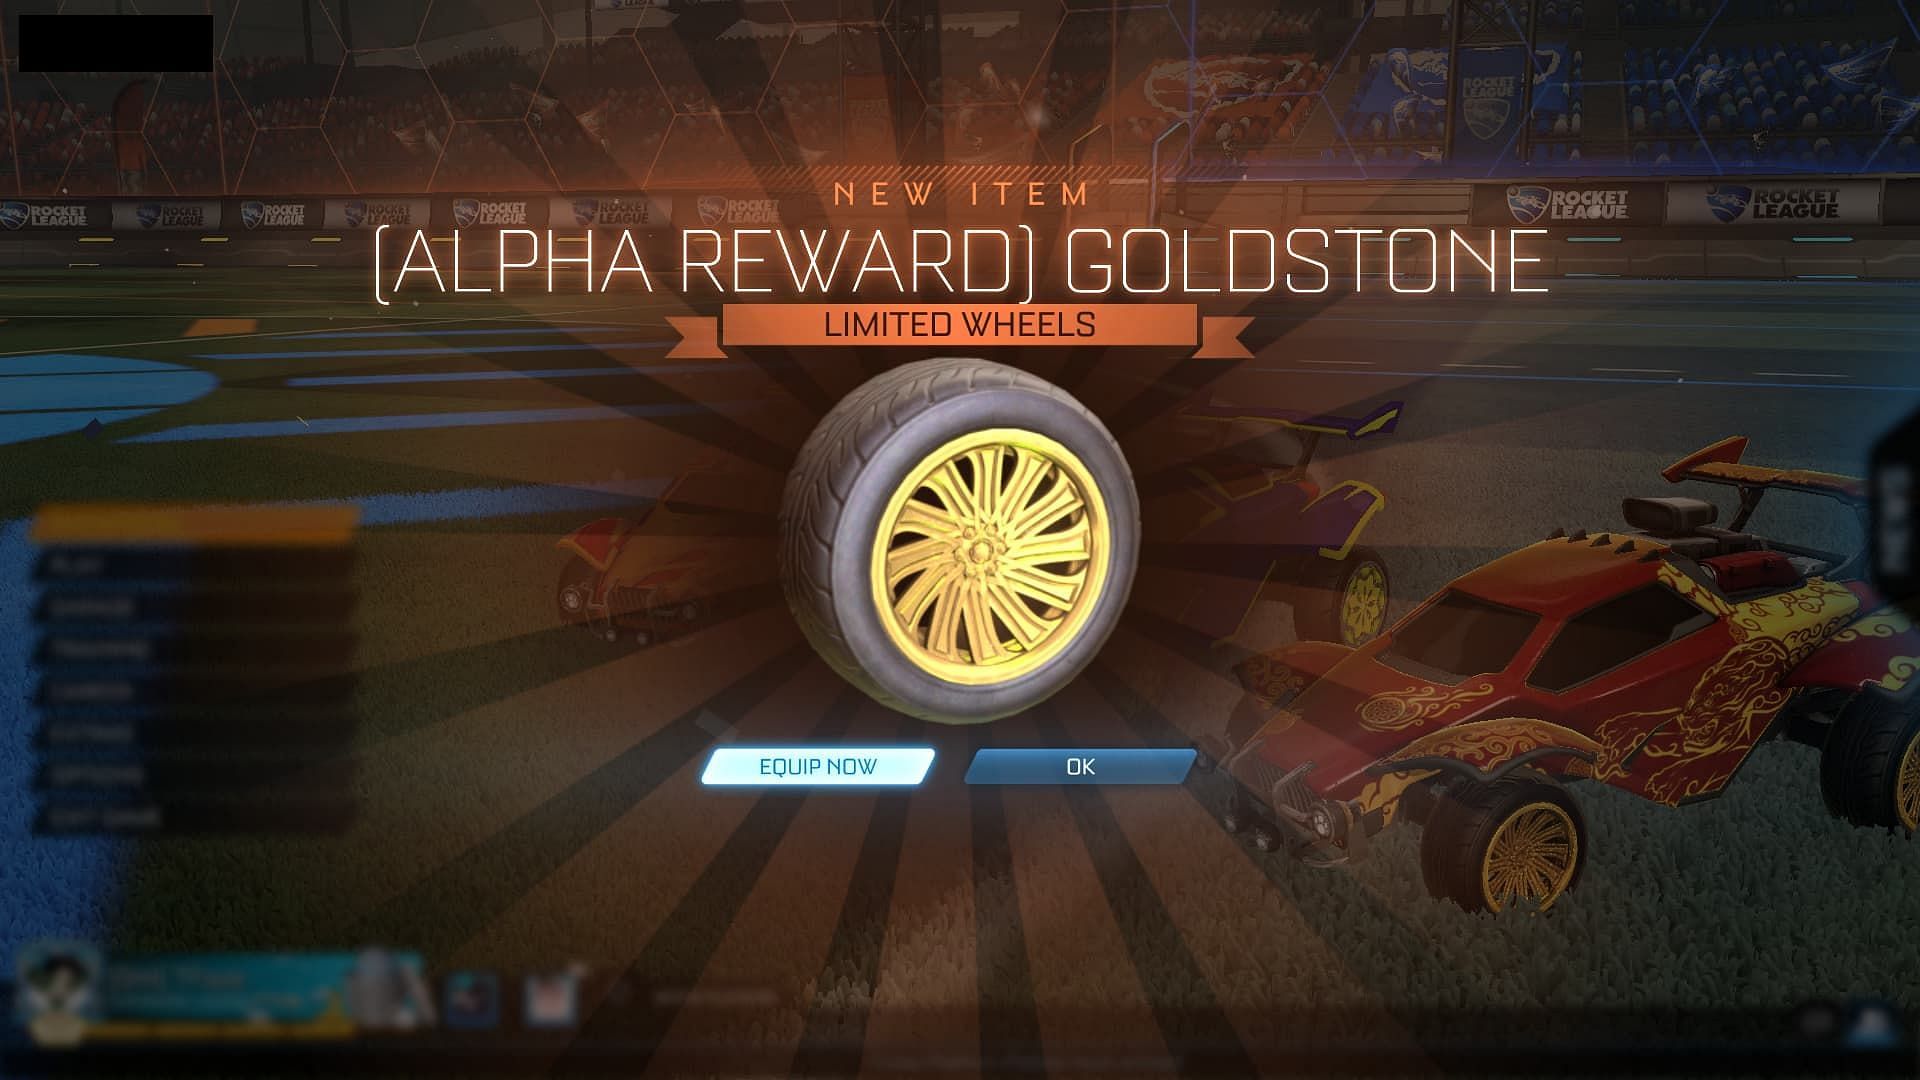 A player receives the Goldstone wheel cosmetic (Image via Psyonix)